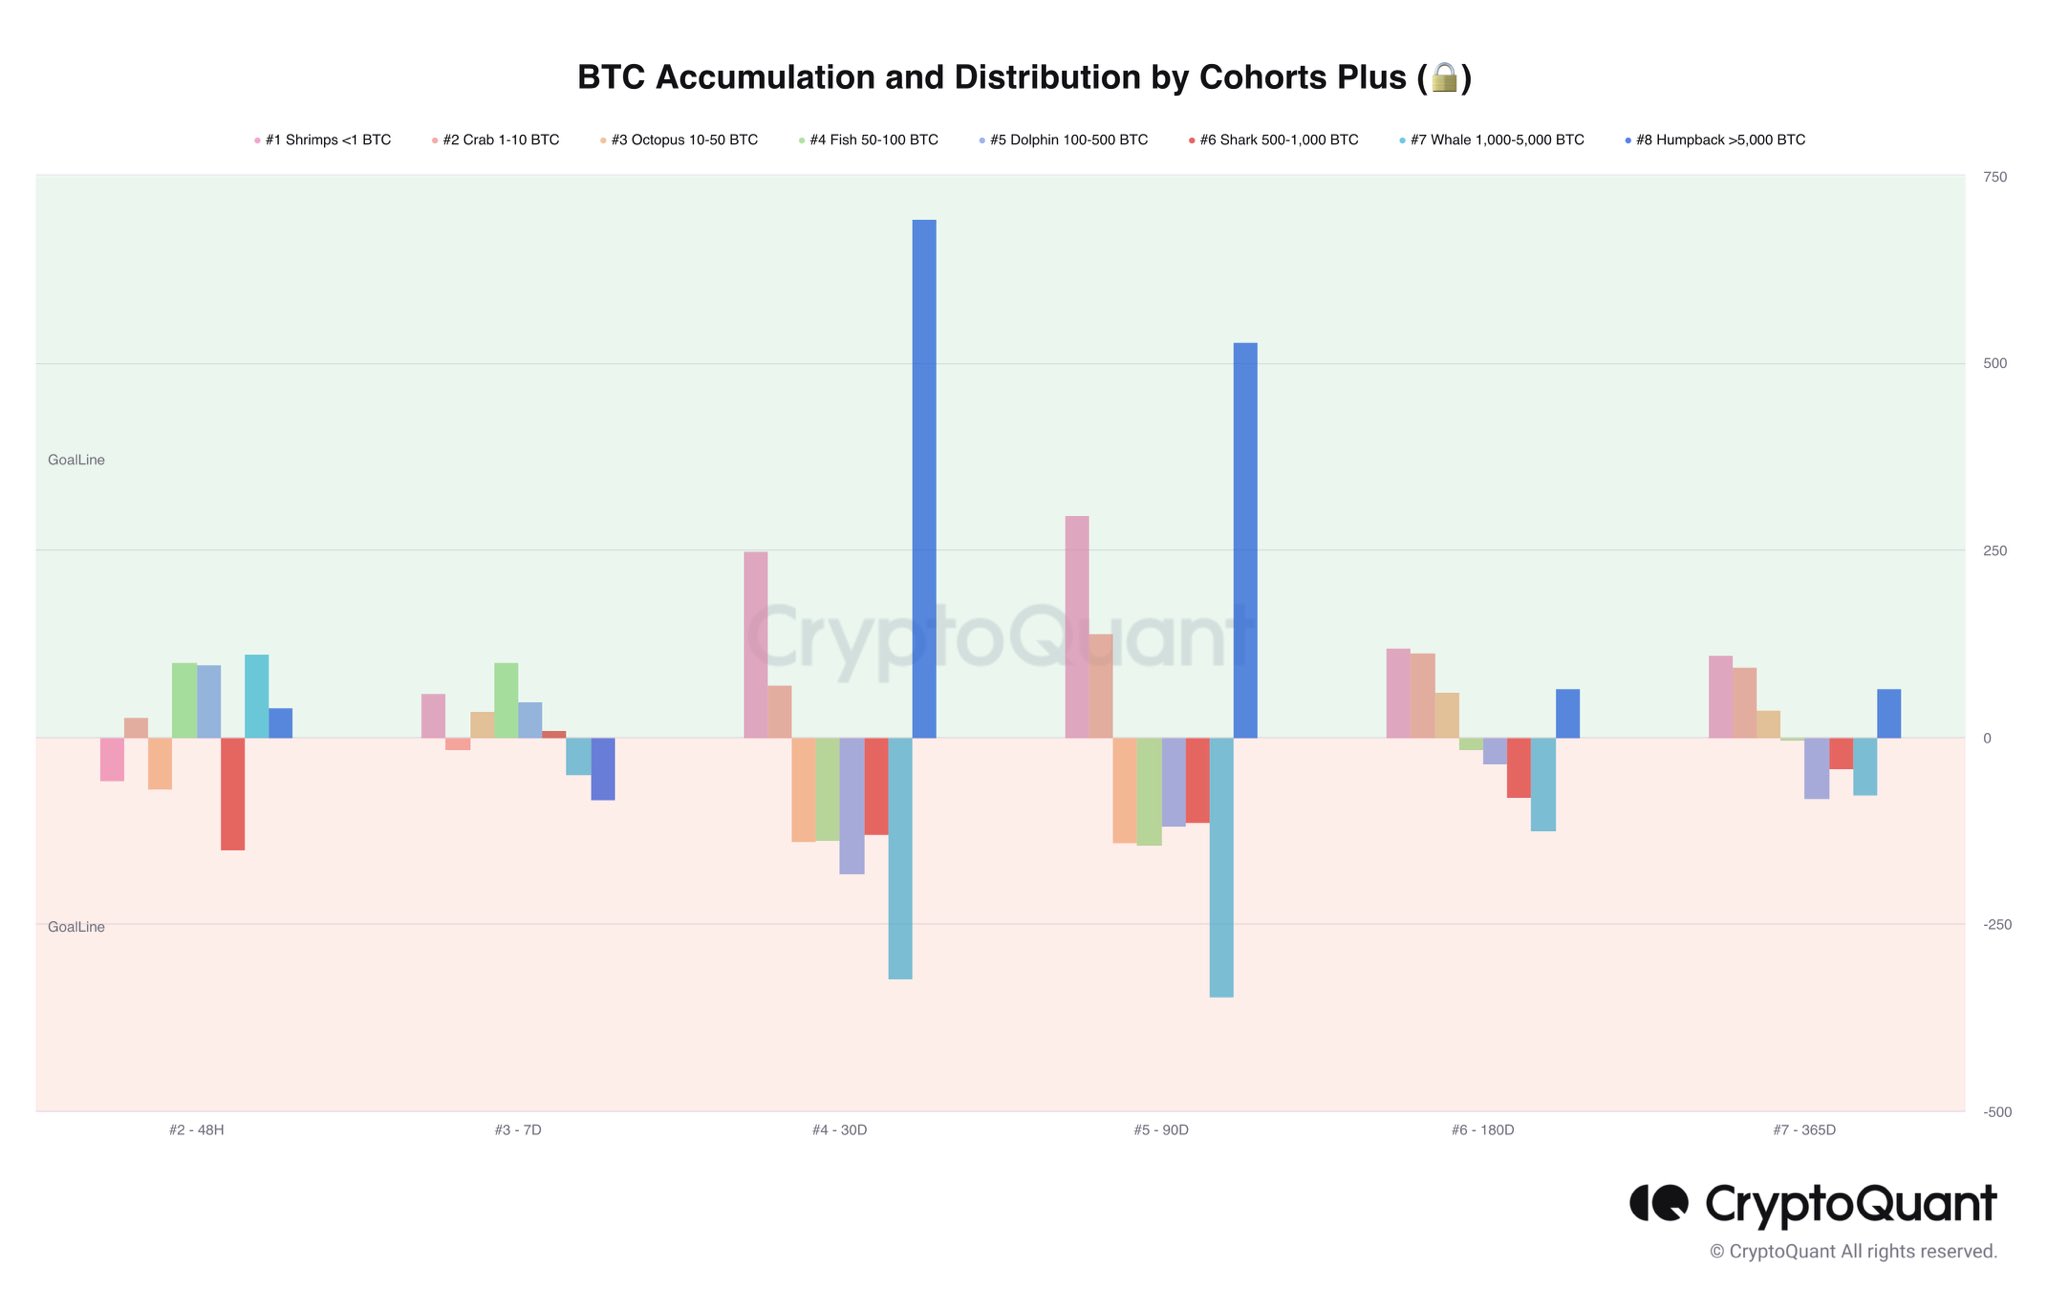 Bitcoin accumulation and distribution by cohorts